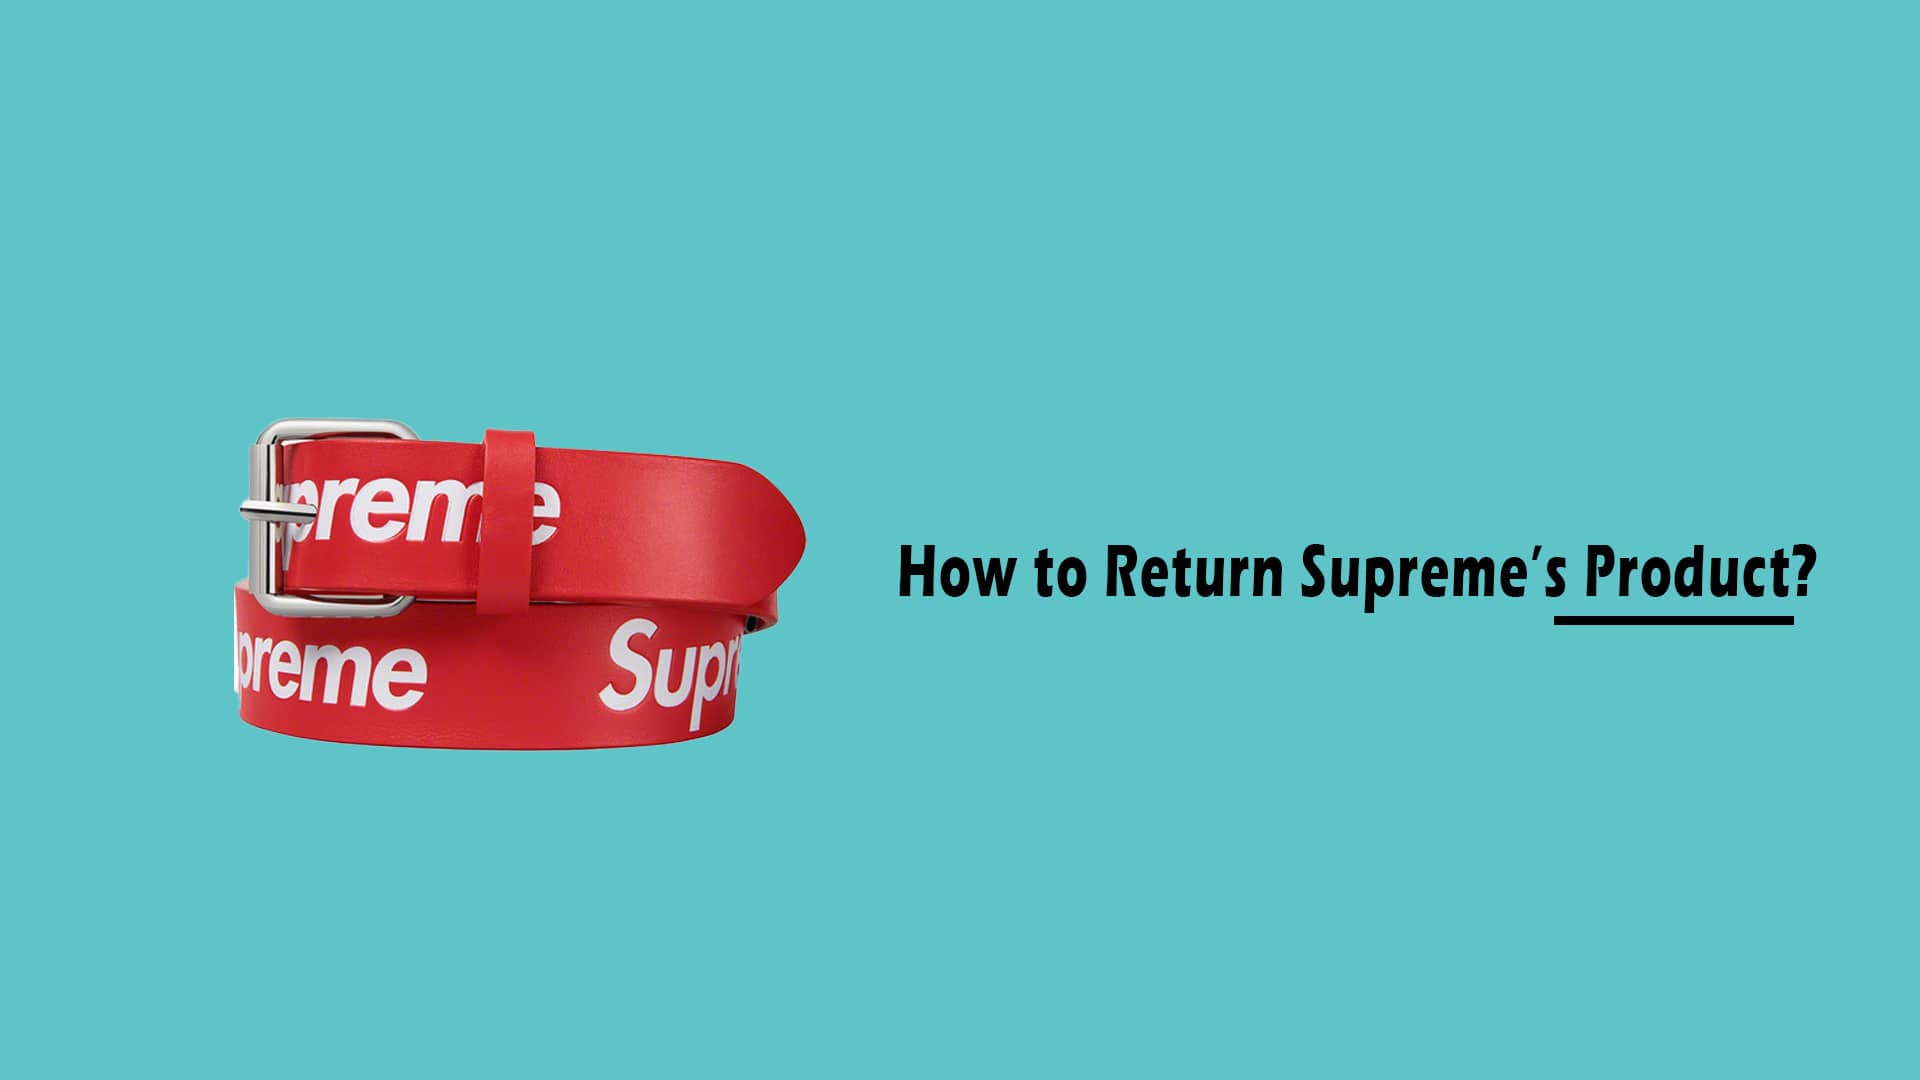 How to Return Supreme’s Product